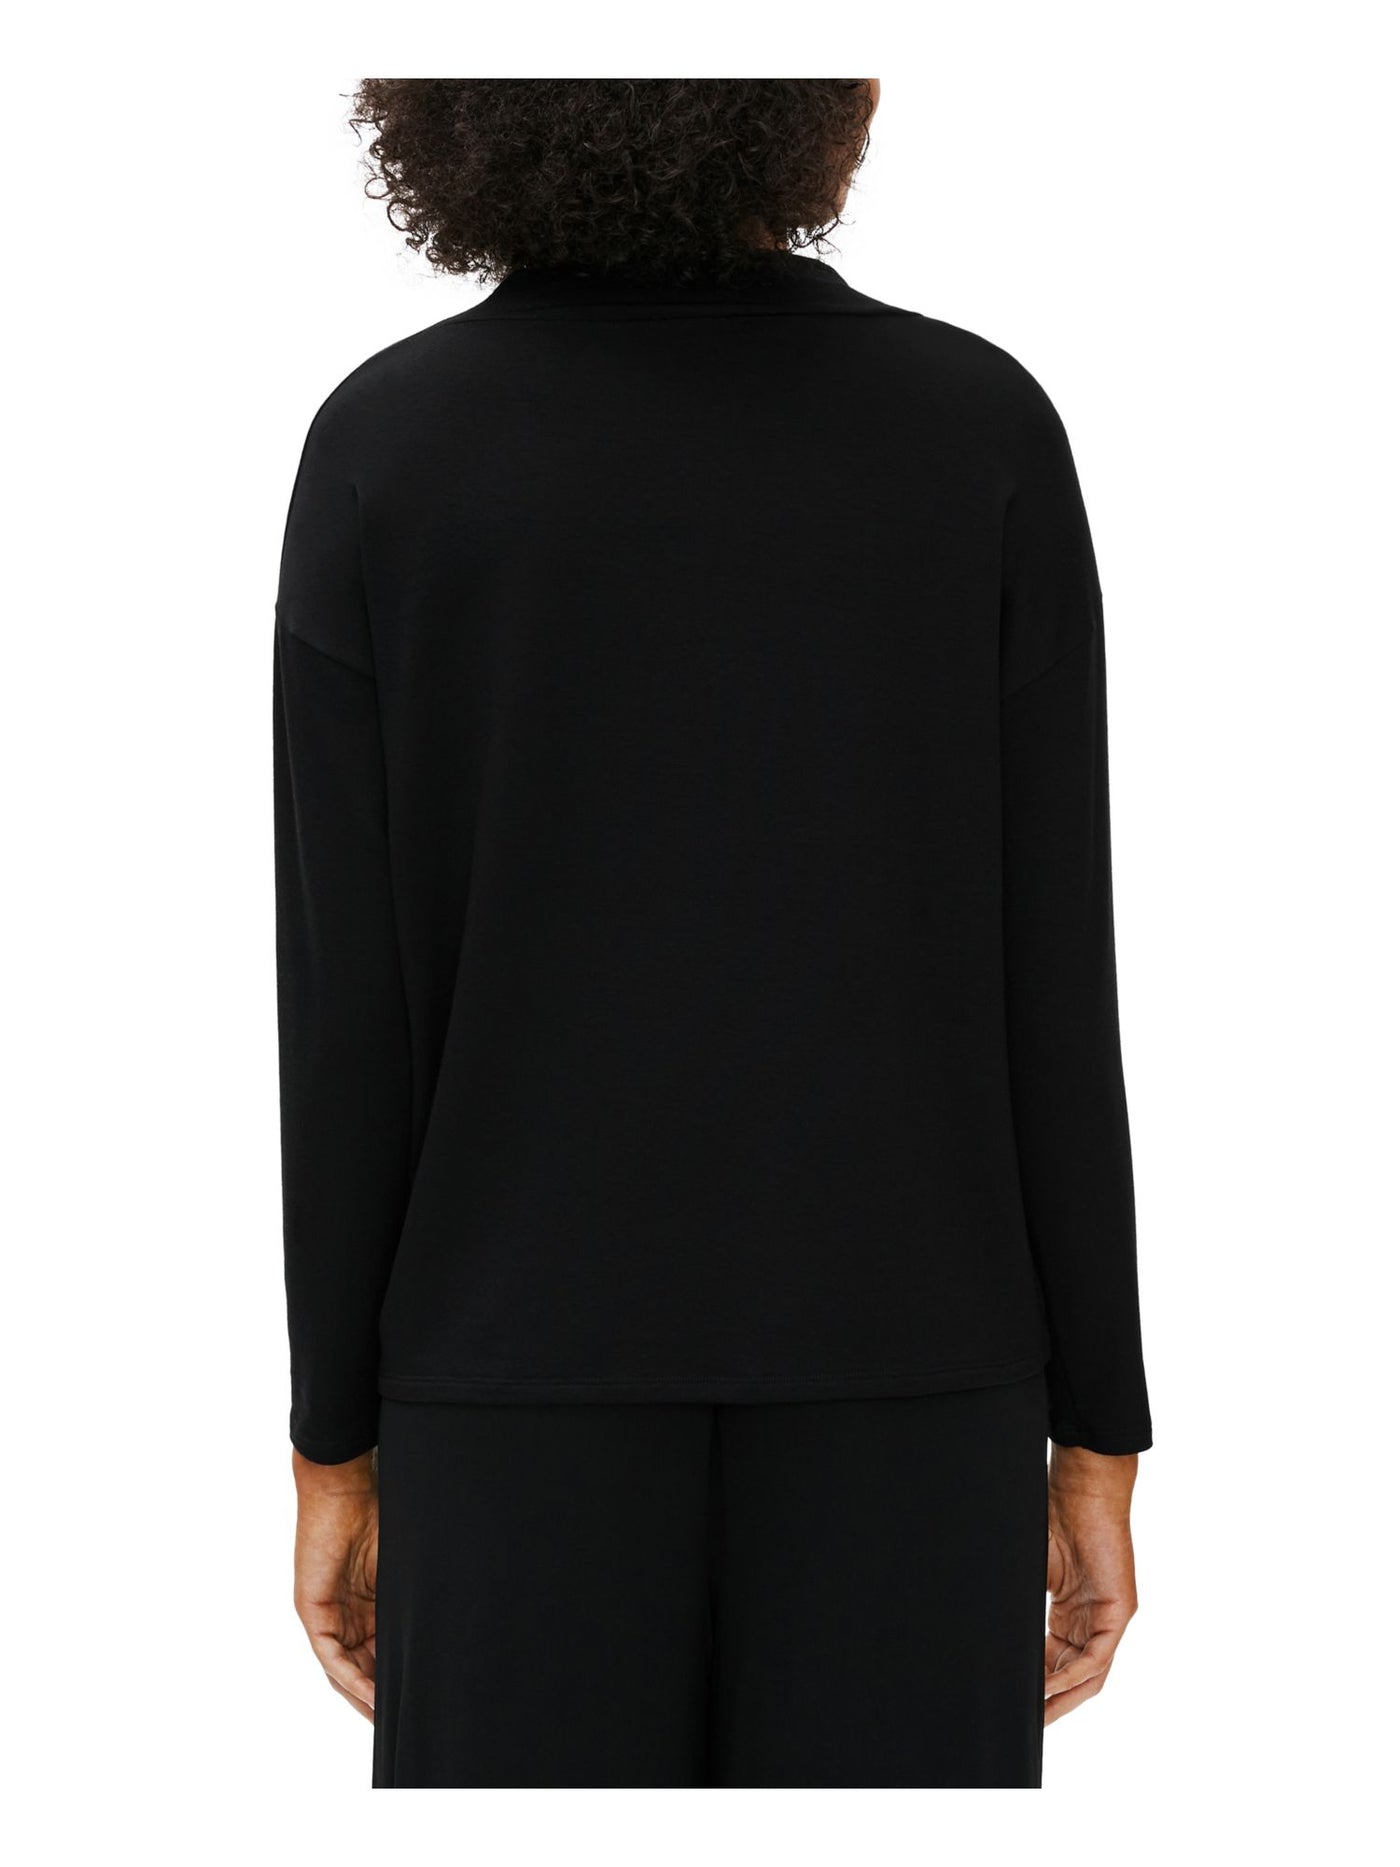 EILEEN FISHER Womens Black Slitted Long Sleeve Funnel Neck Top XS